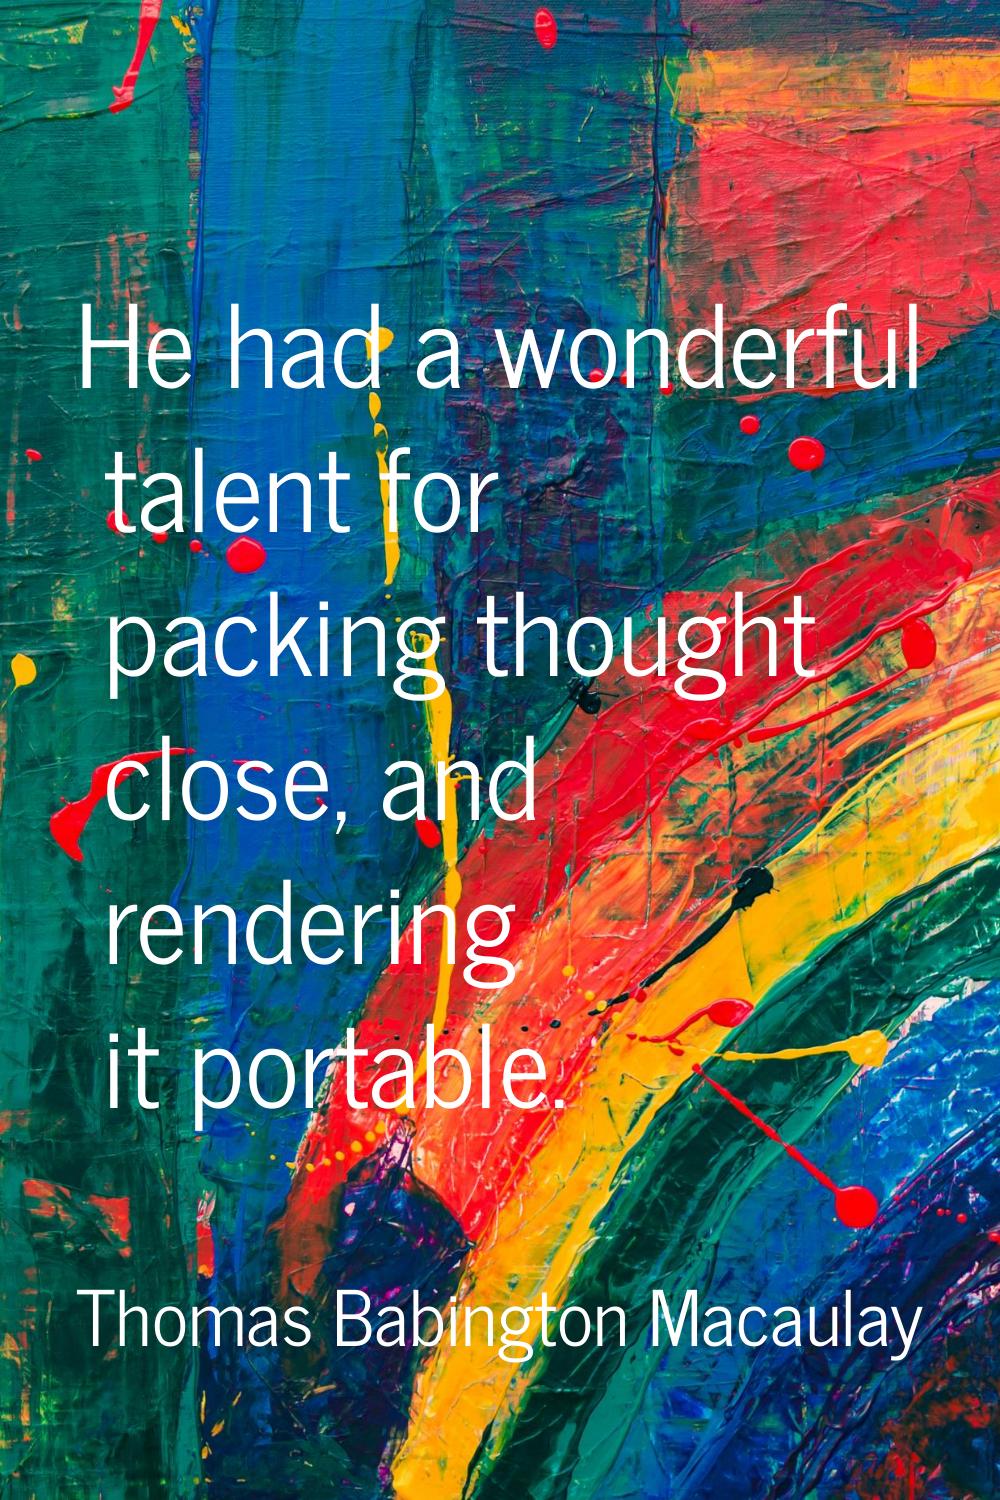 He had a wonderful talent for packing thought close, and rendering it portable.